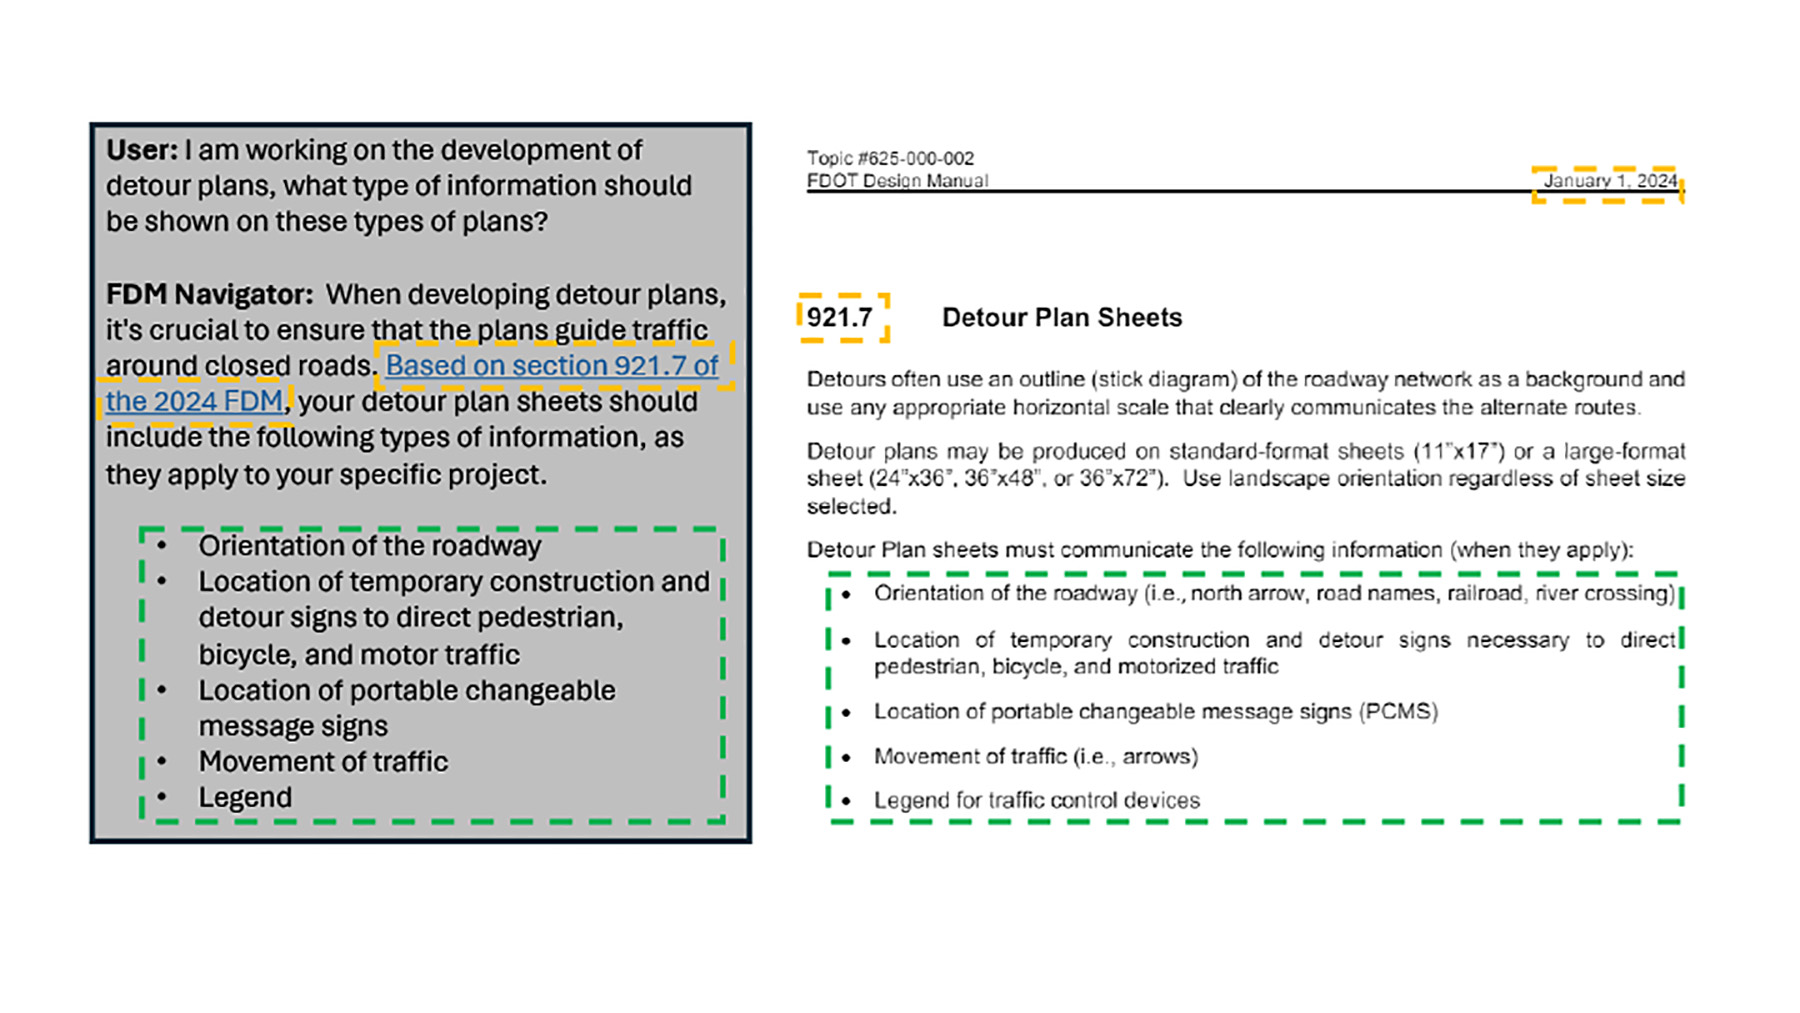 Image shows a sample question about detour plans and the response to that question, which includes the section of a publication the answer comes from. 